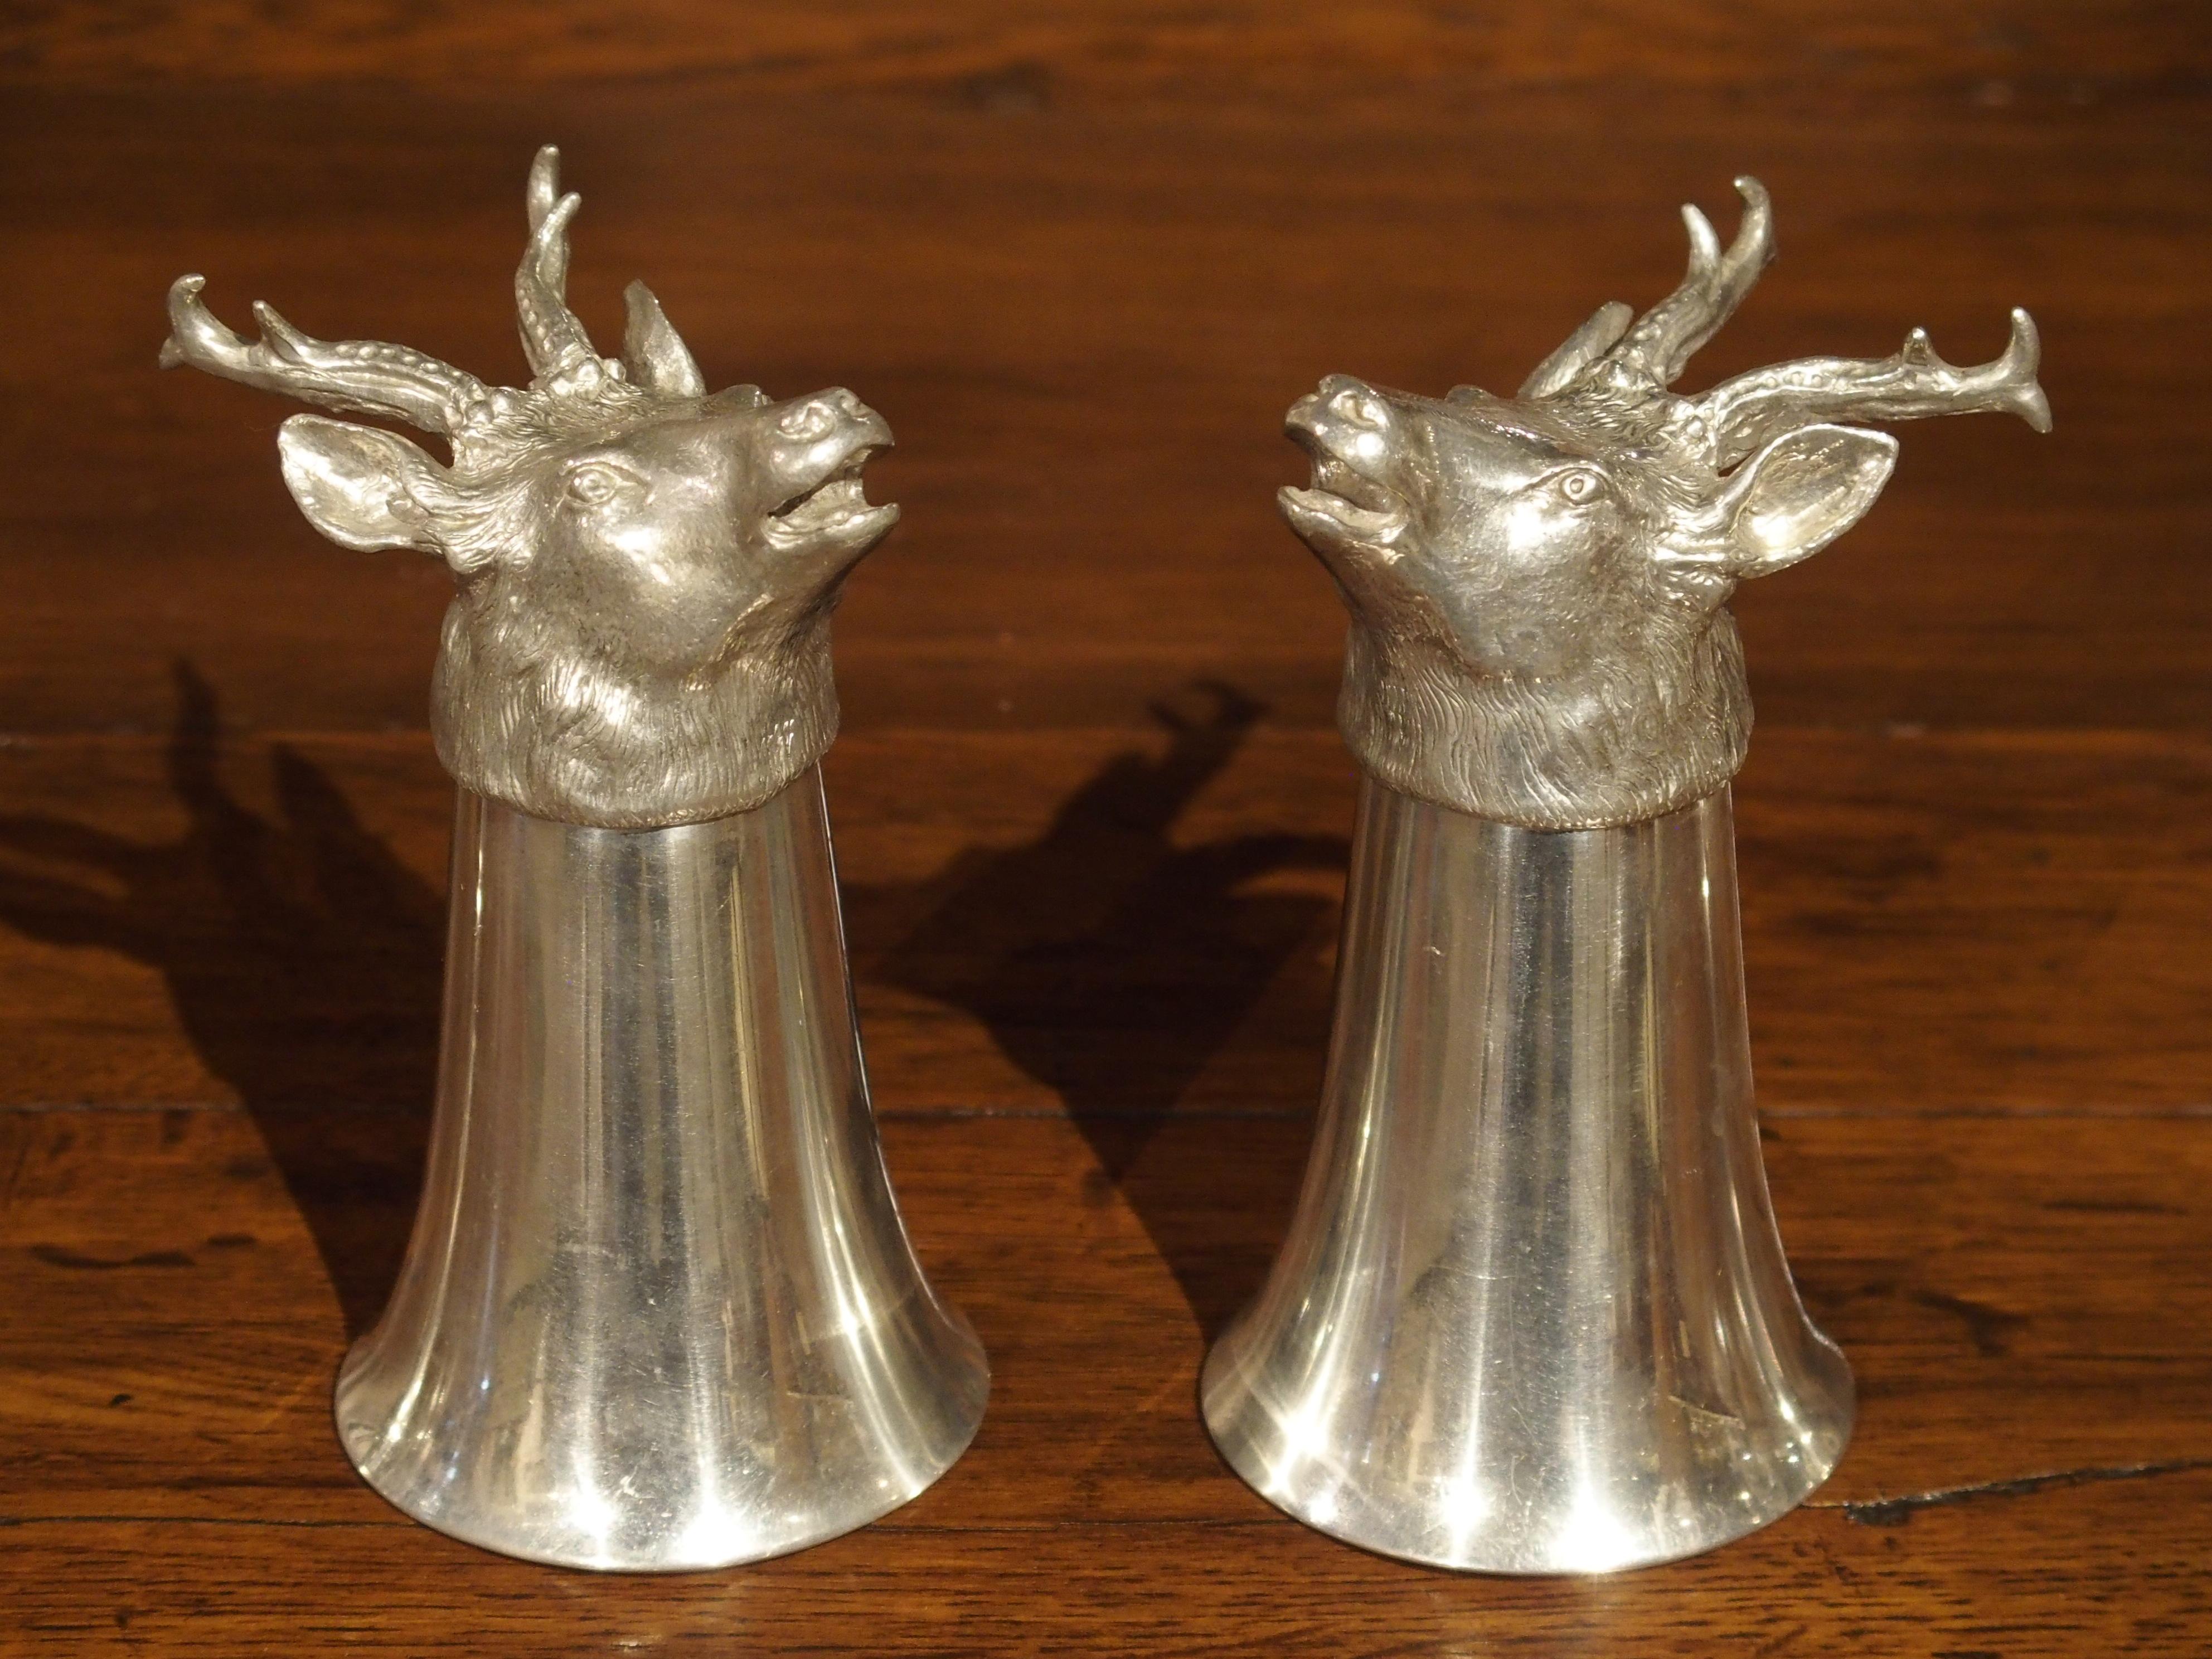 This set of four pewter stirrup cups and ice bucket can be considered a rare find. Typically, you might find people who own individual stirrup cups or even a mismatched grouping of them, but it is hard to find sets with matching ice bucket.

The